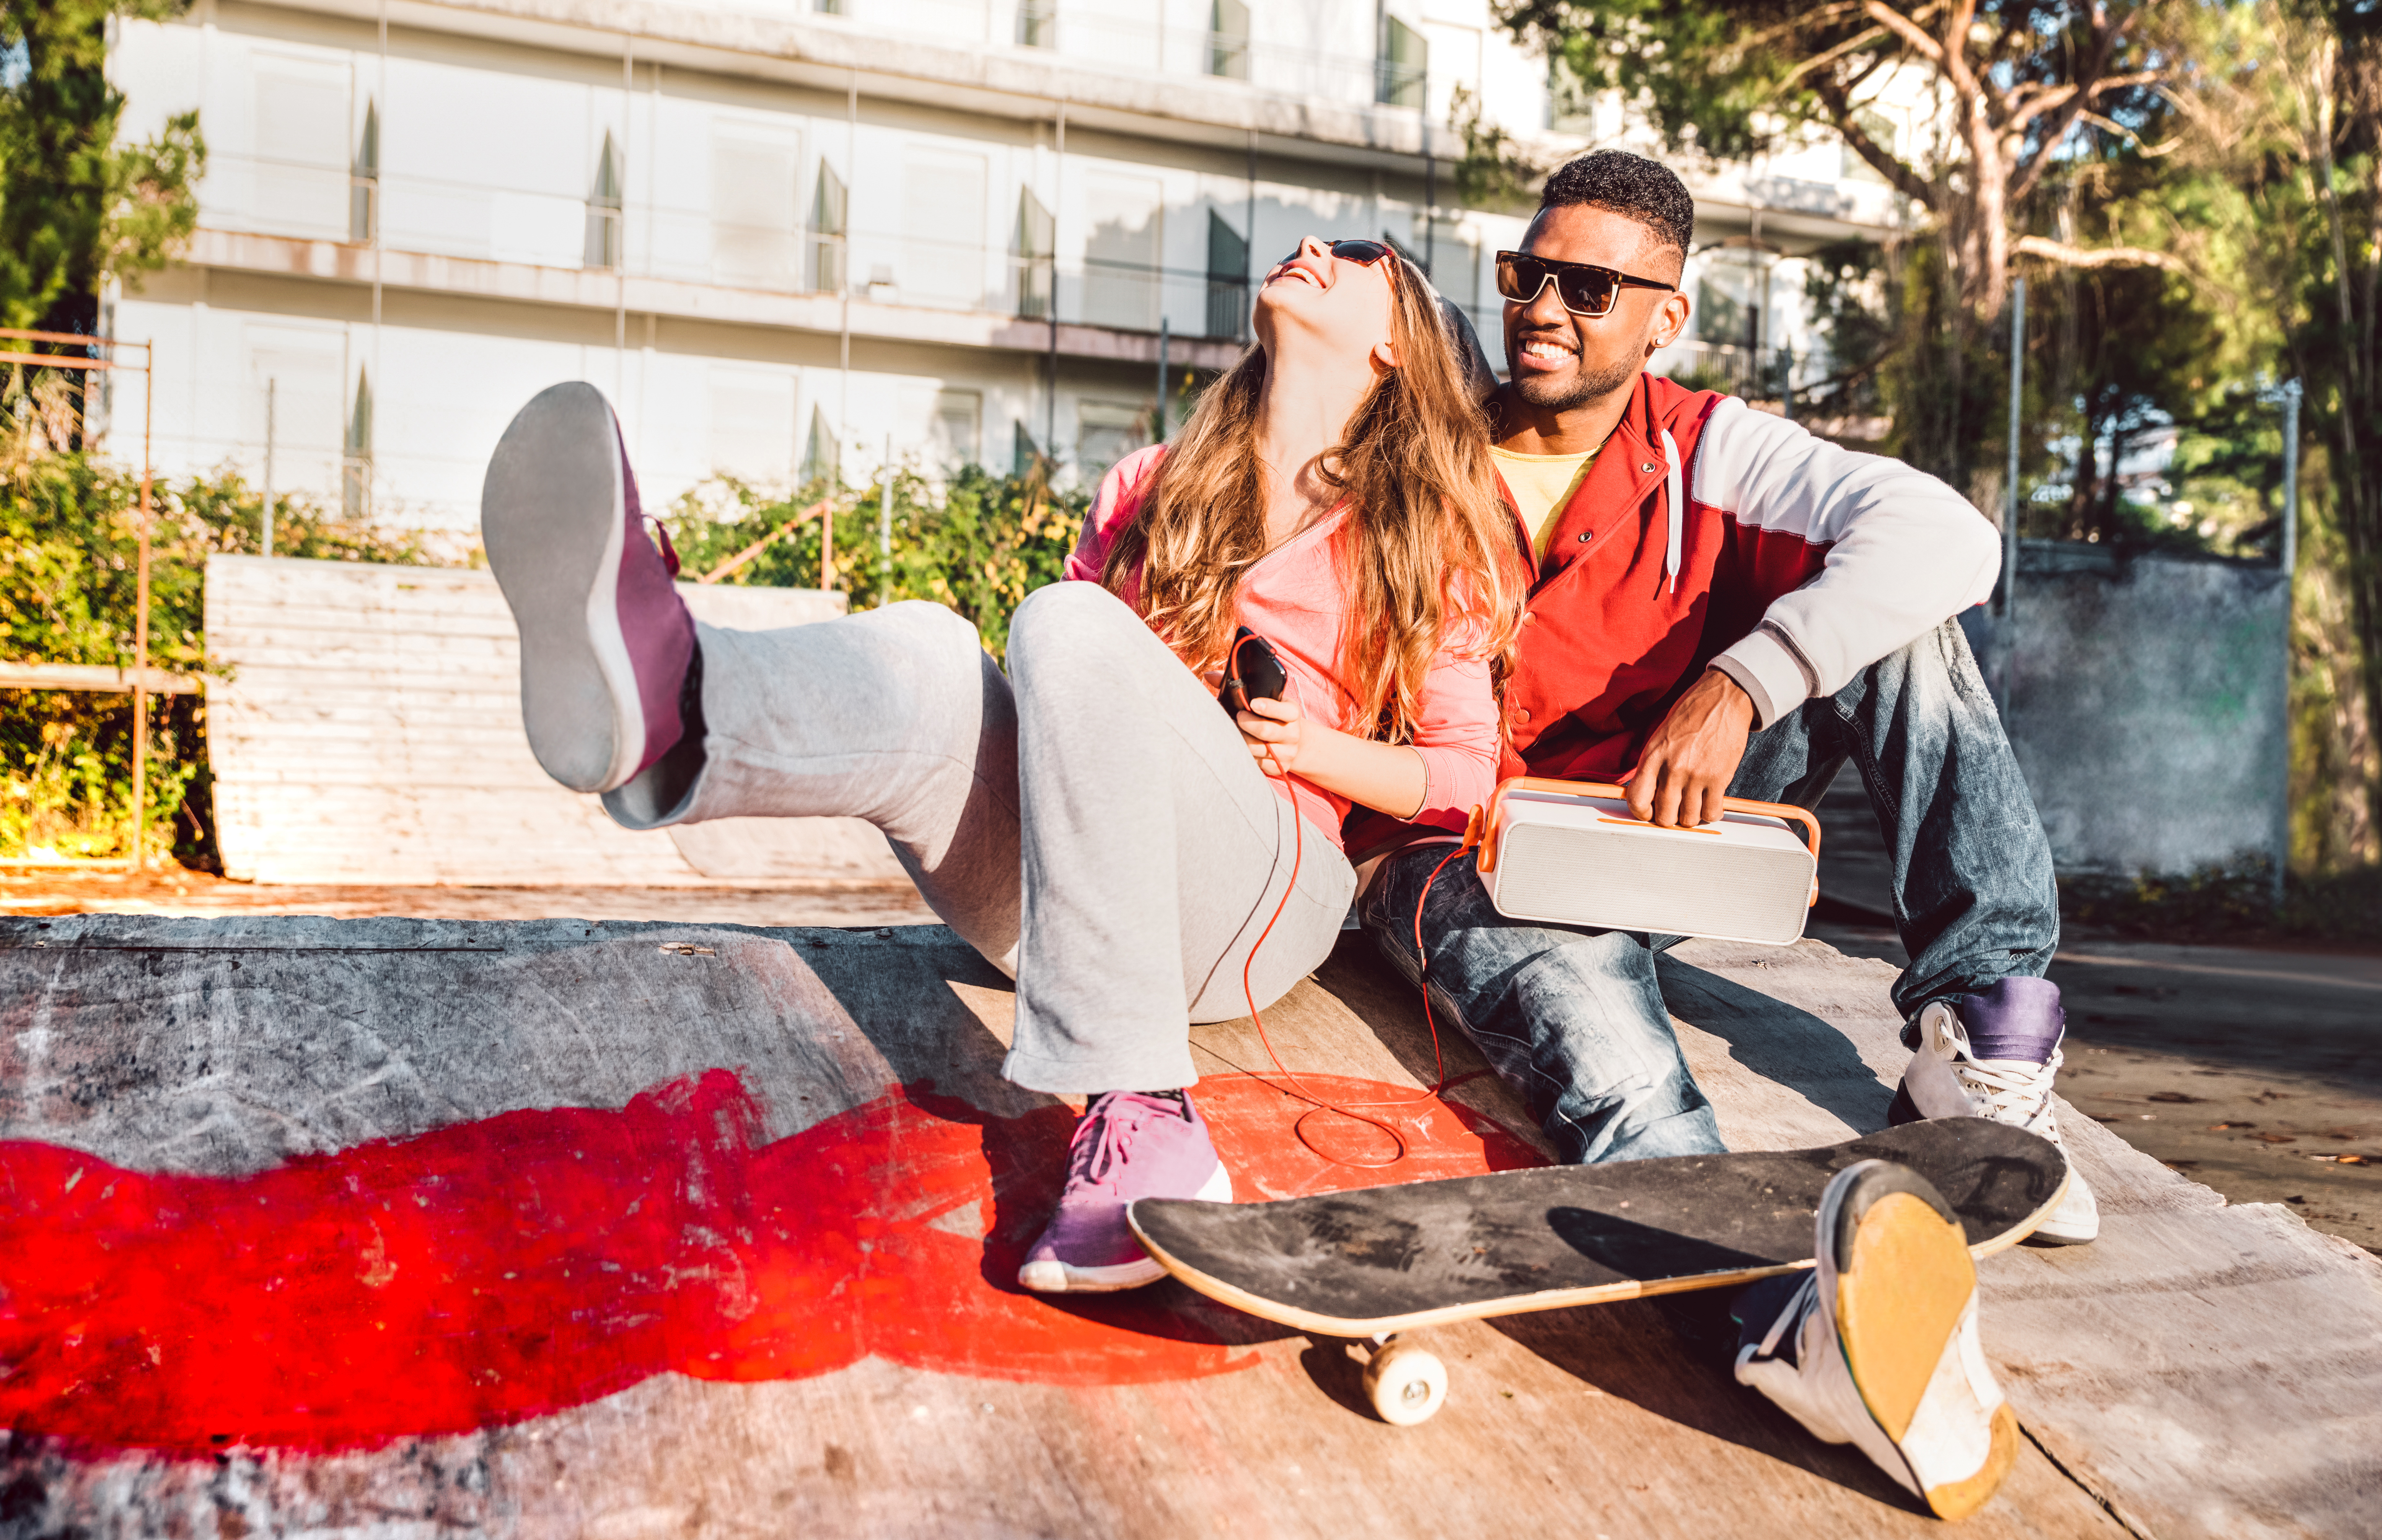 Two young people hanging out at a skate park. | Source Getty Images